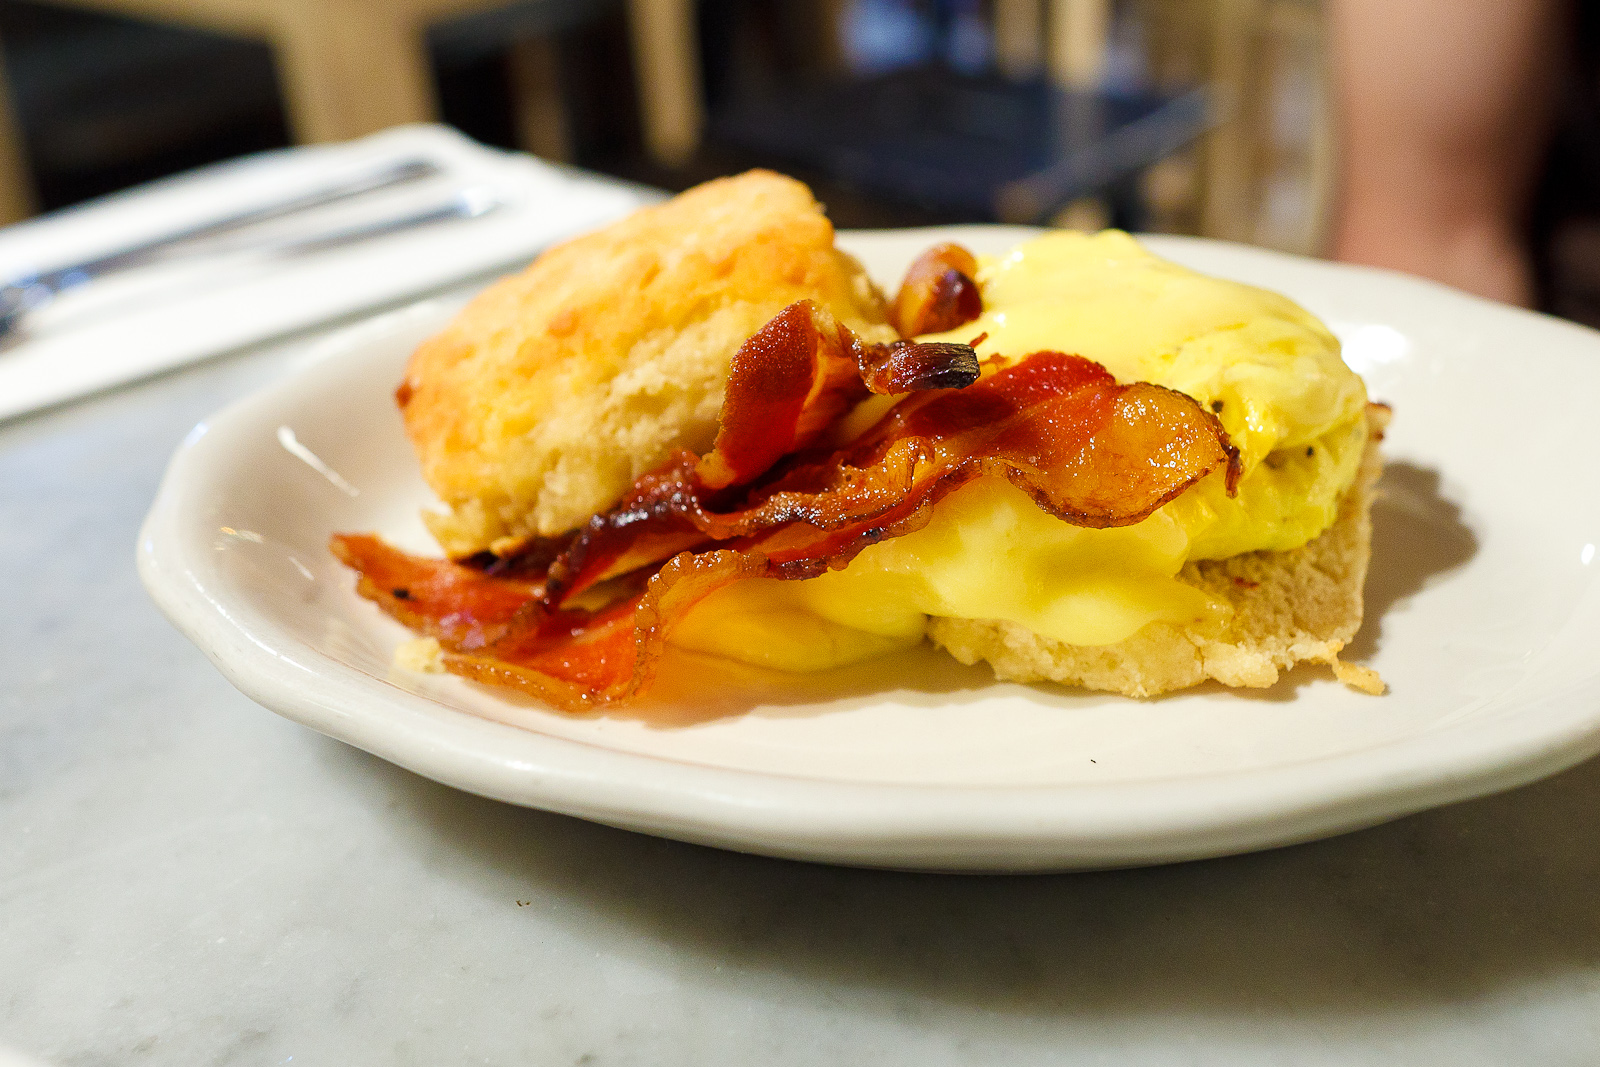 Biscuit with bacon, egg, and cheese ($7.50)